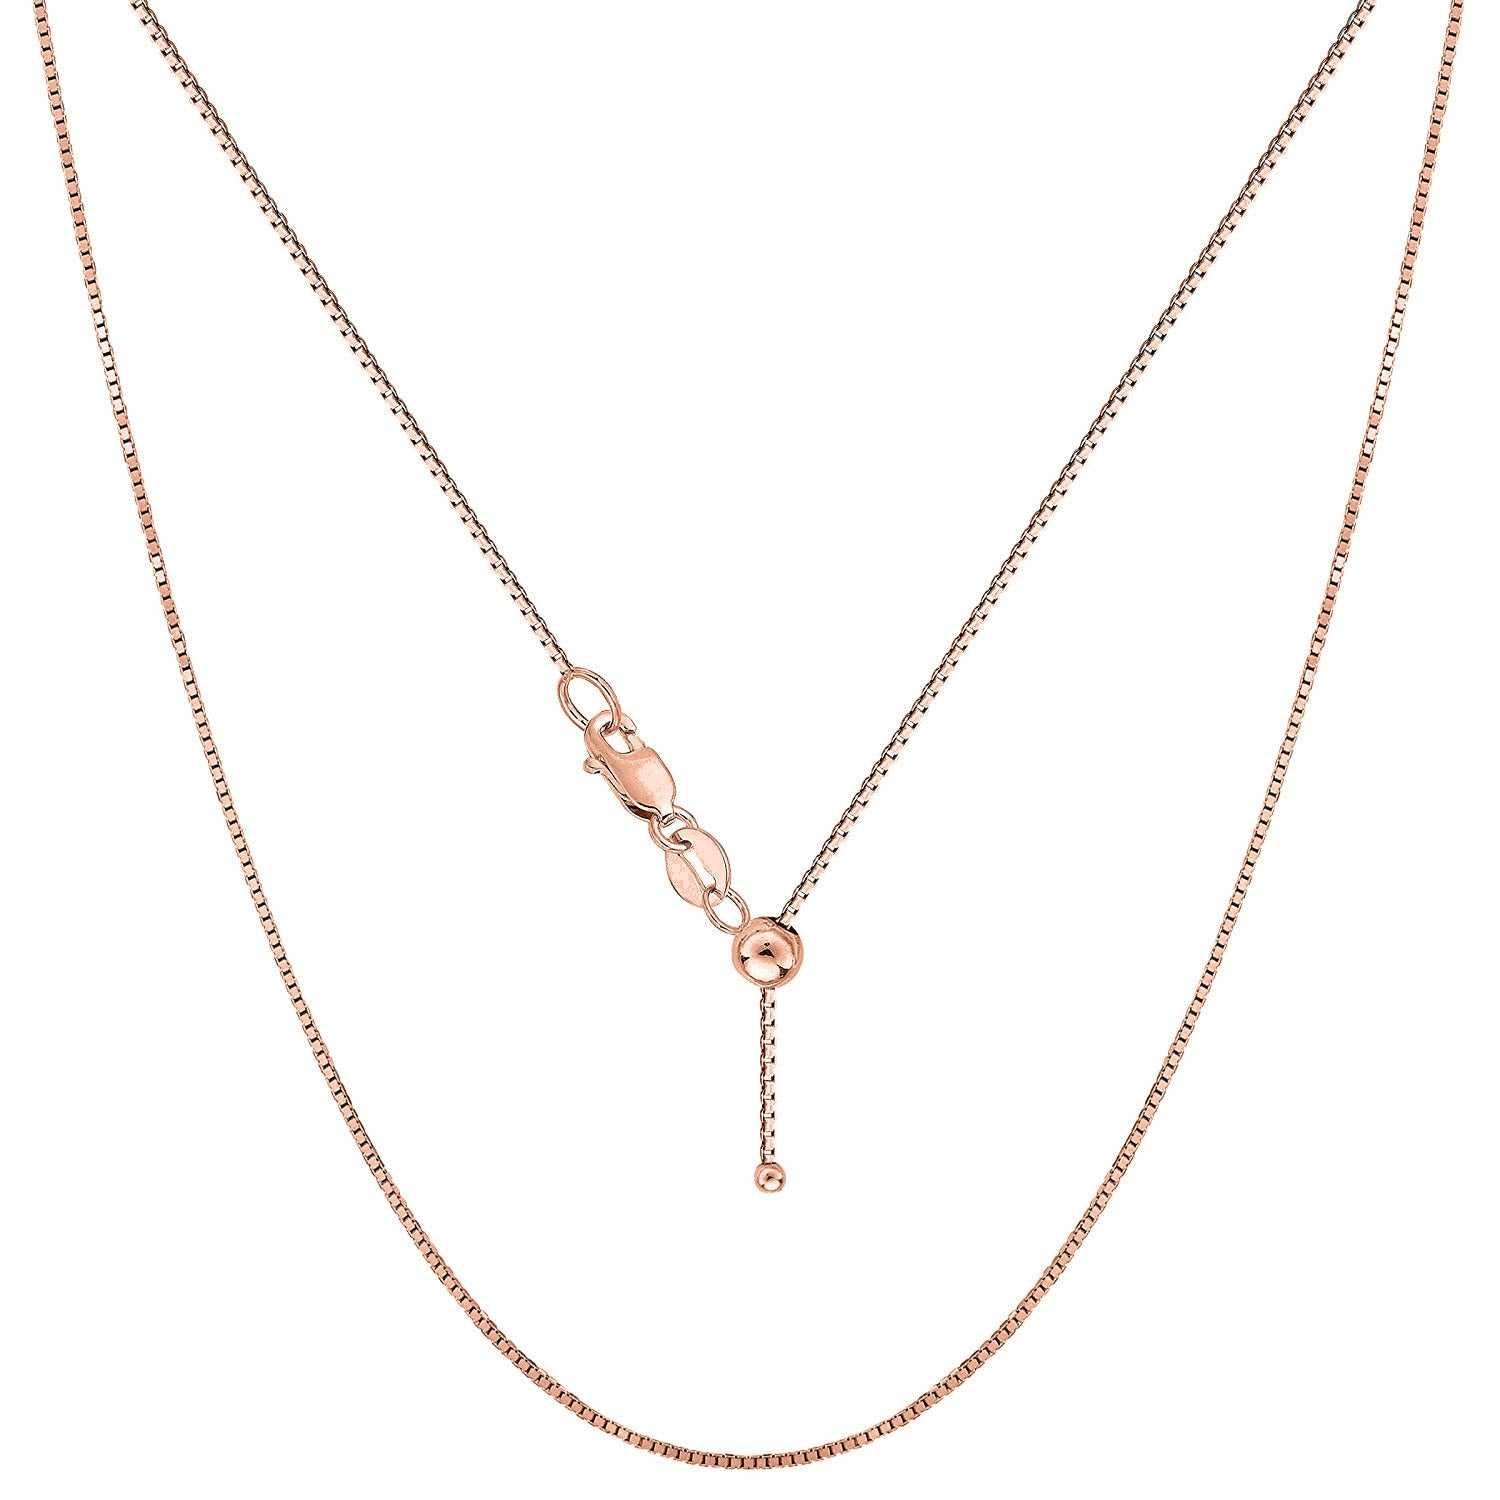 Rose Gold Italian Sterling Silver Adjustable Box Chain Necklace